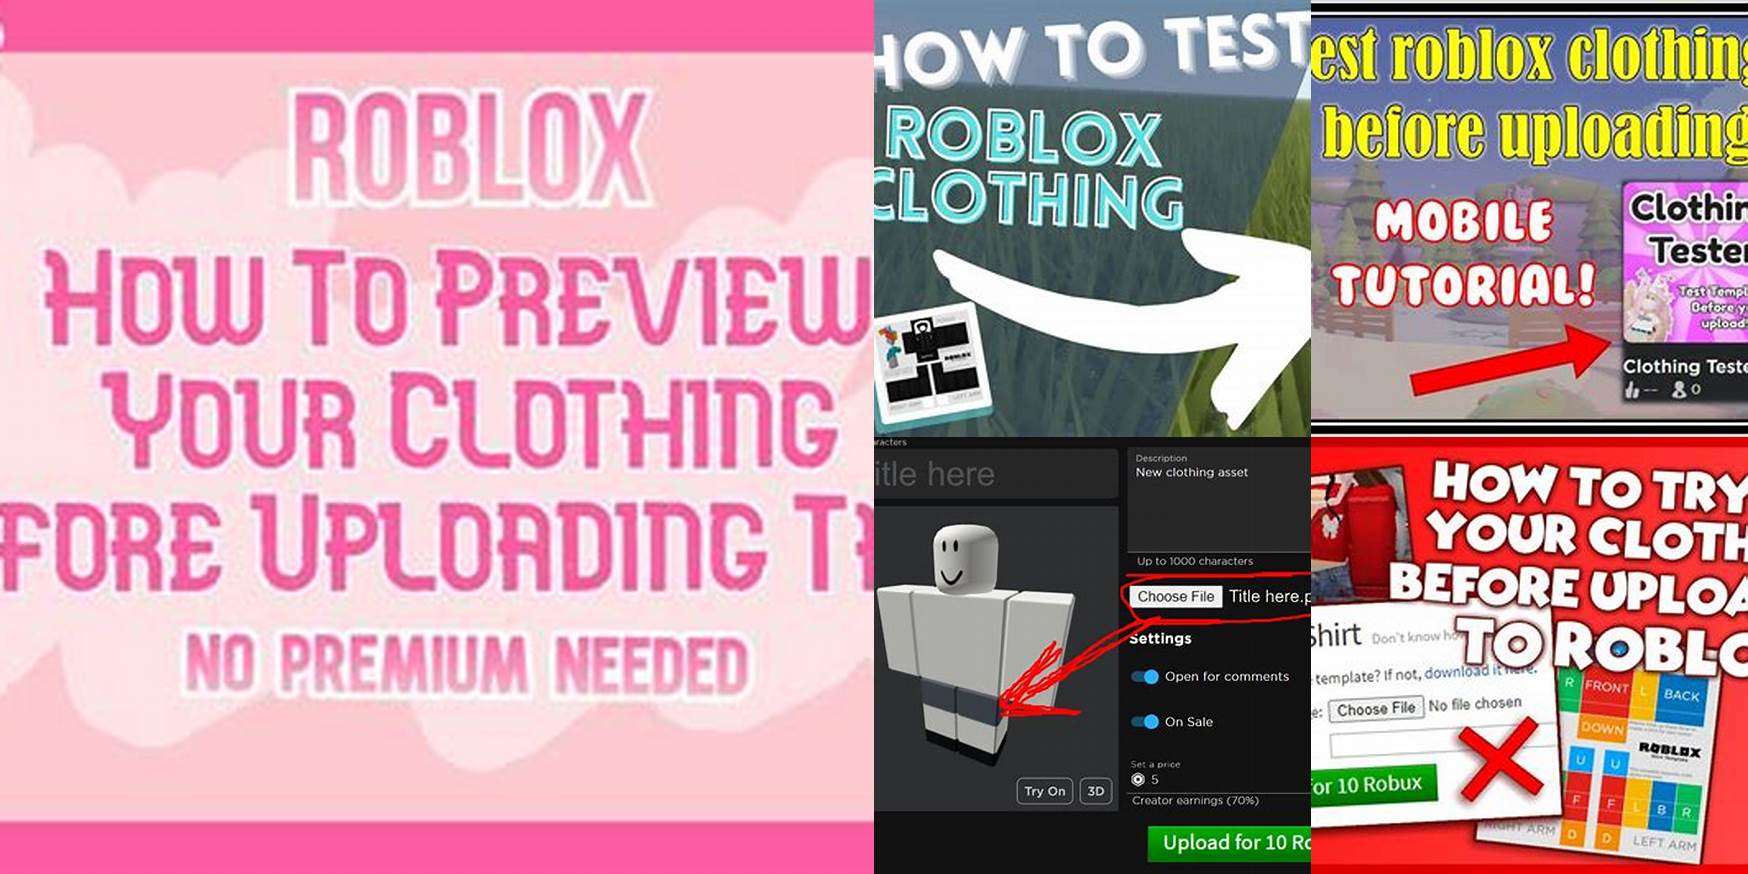 How To Preview Roblox Clothing Before Uploading